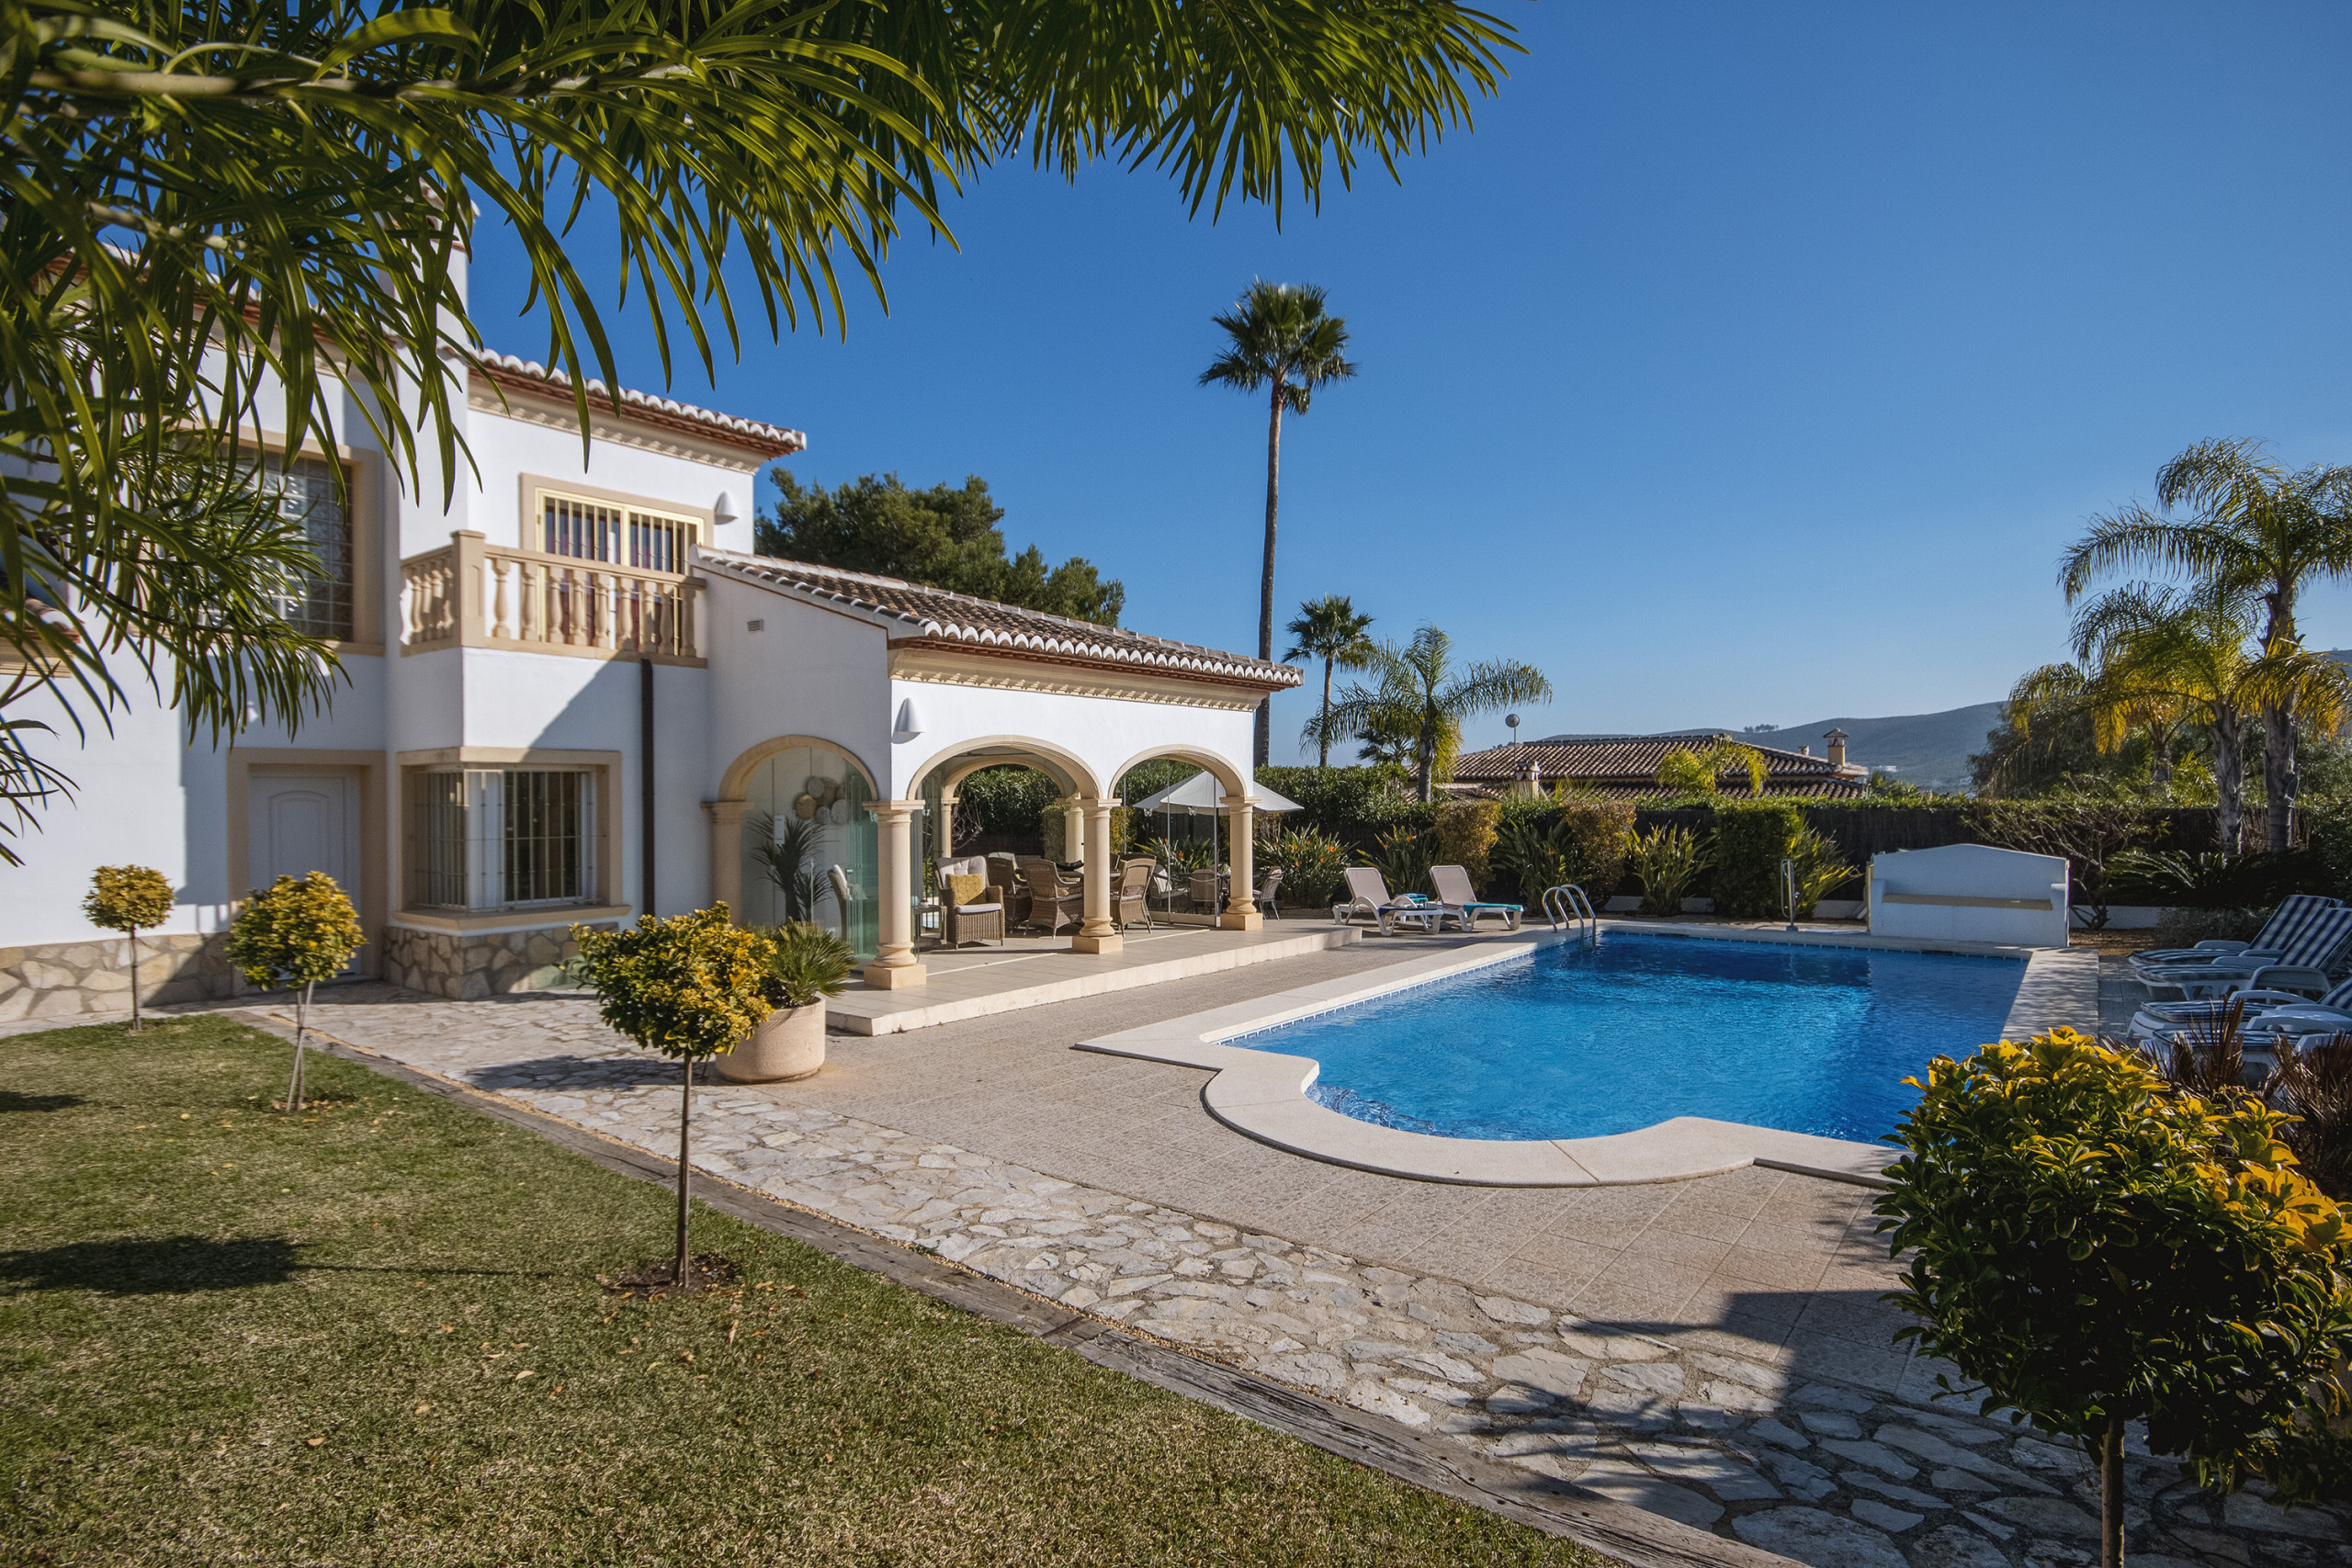 Three Notable Manors for Bigger Gatherings on the Javea